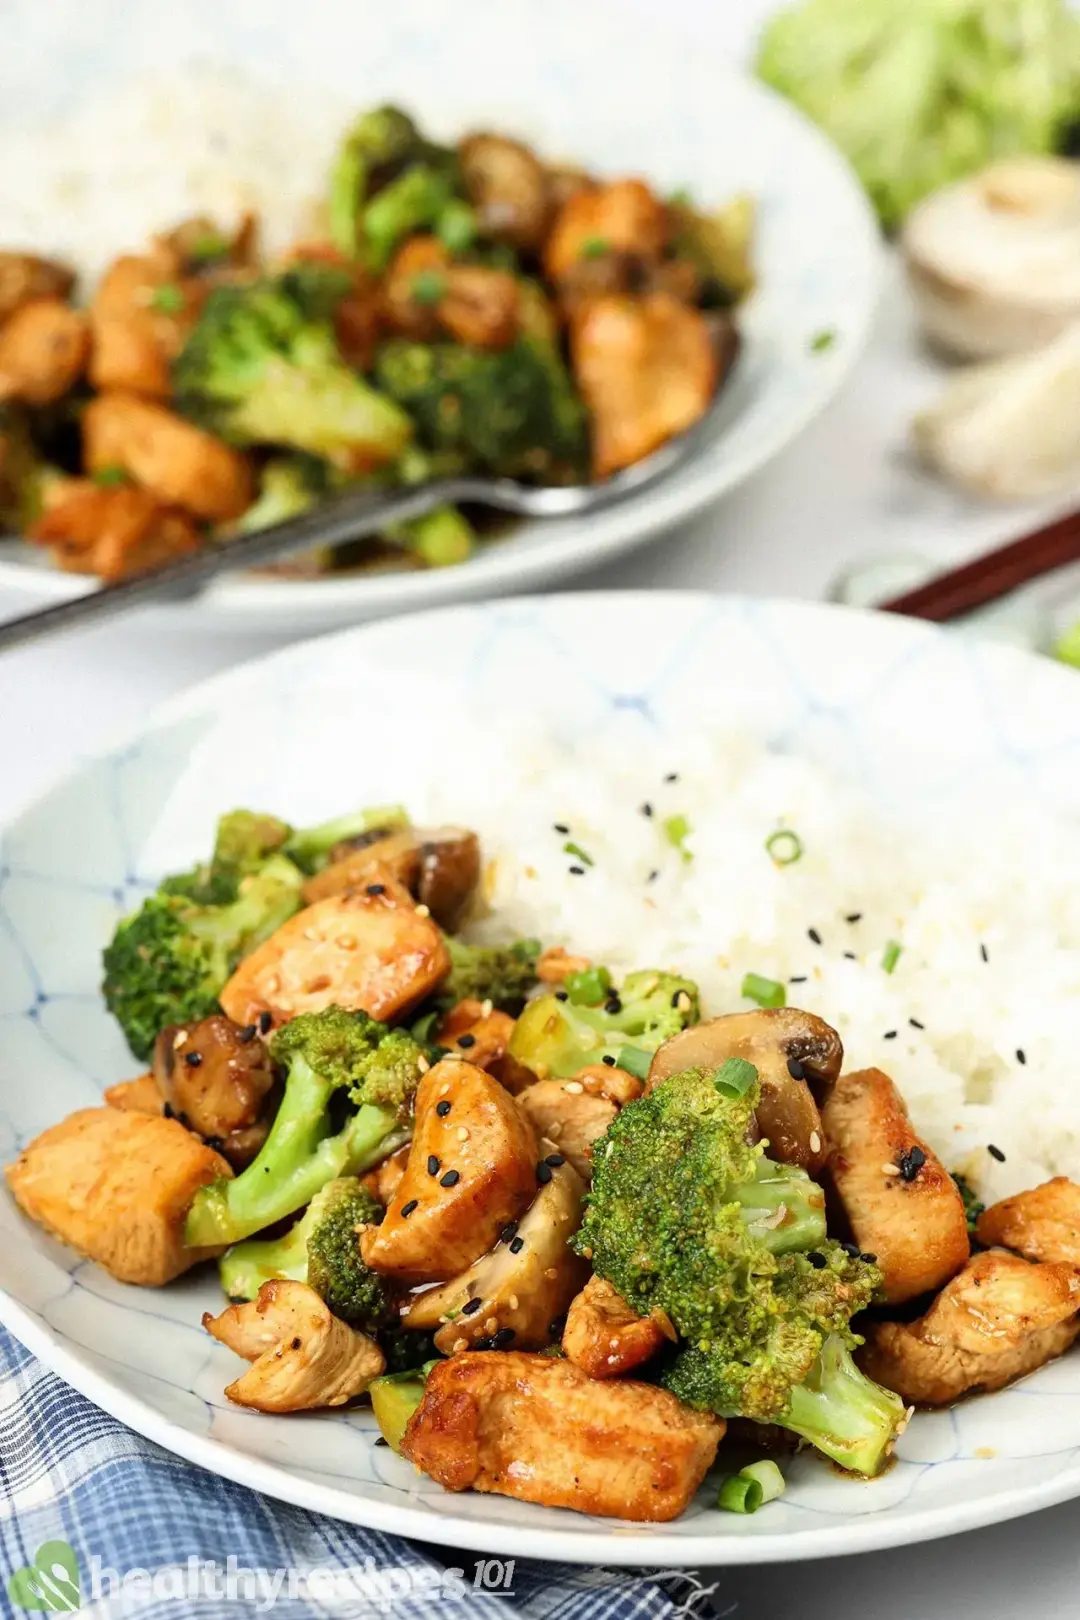 Is Stir fried Chicken and Broccoli Healthy